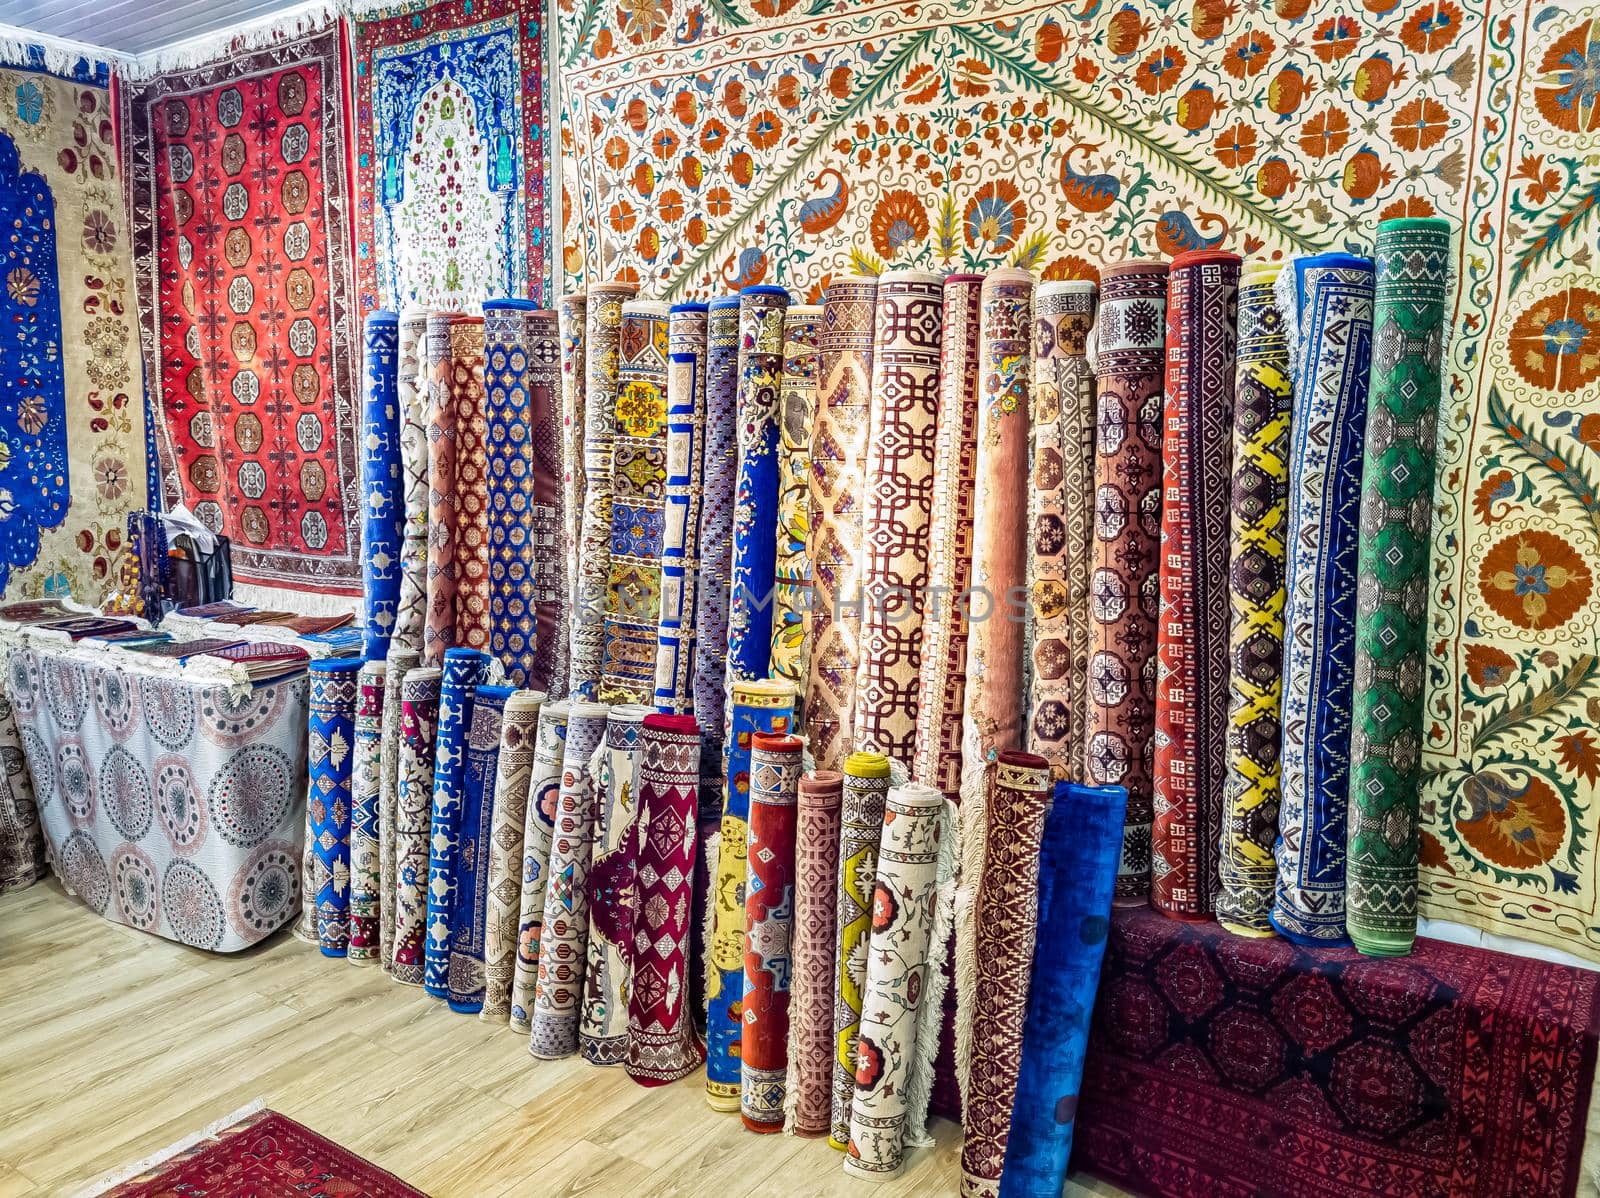 Ethnic carpet, ornamental folk bags, many ornate pillows with embroidery in asian shop, store. Asian market, trade fair in Uzbekistan. Traditional national ornament. Asian handicraft, Uzbek craft.